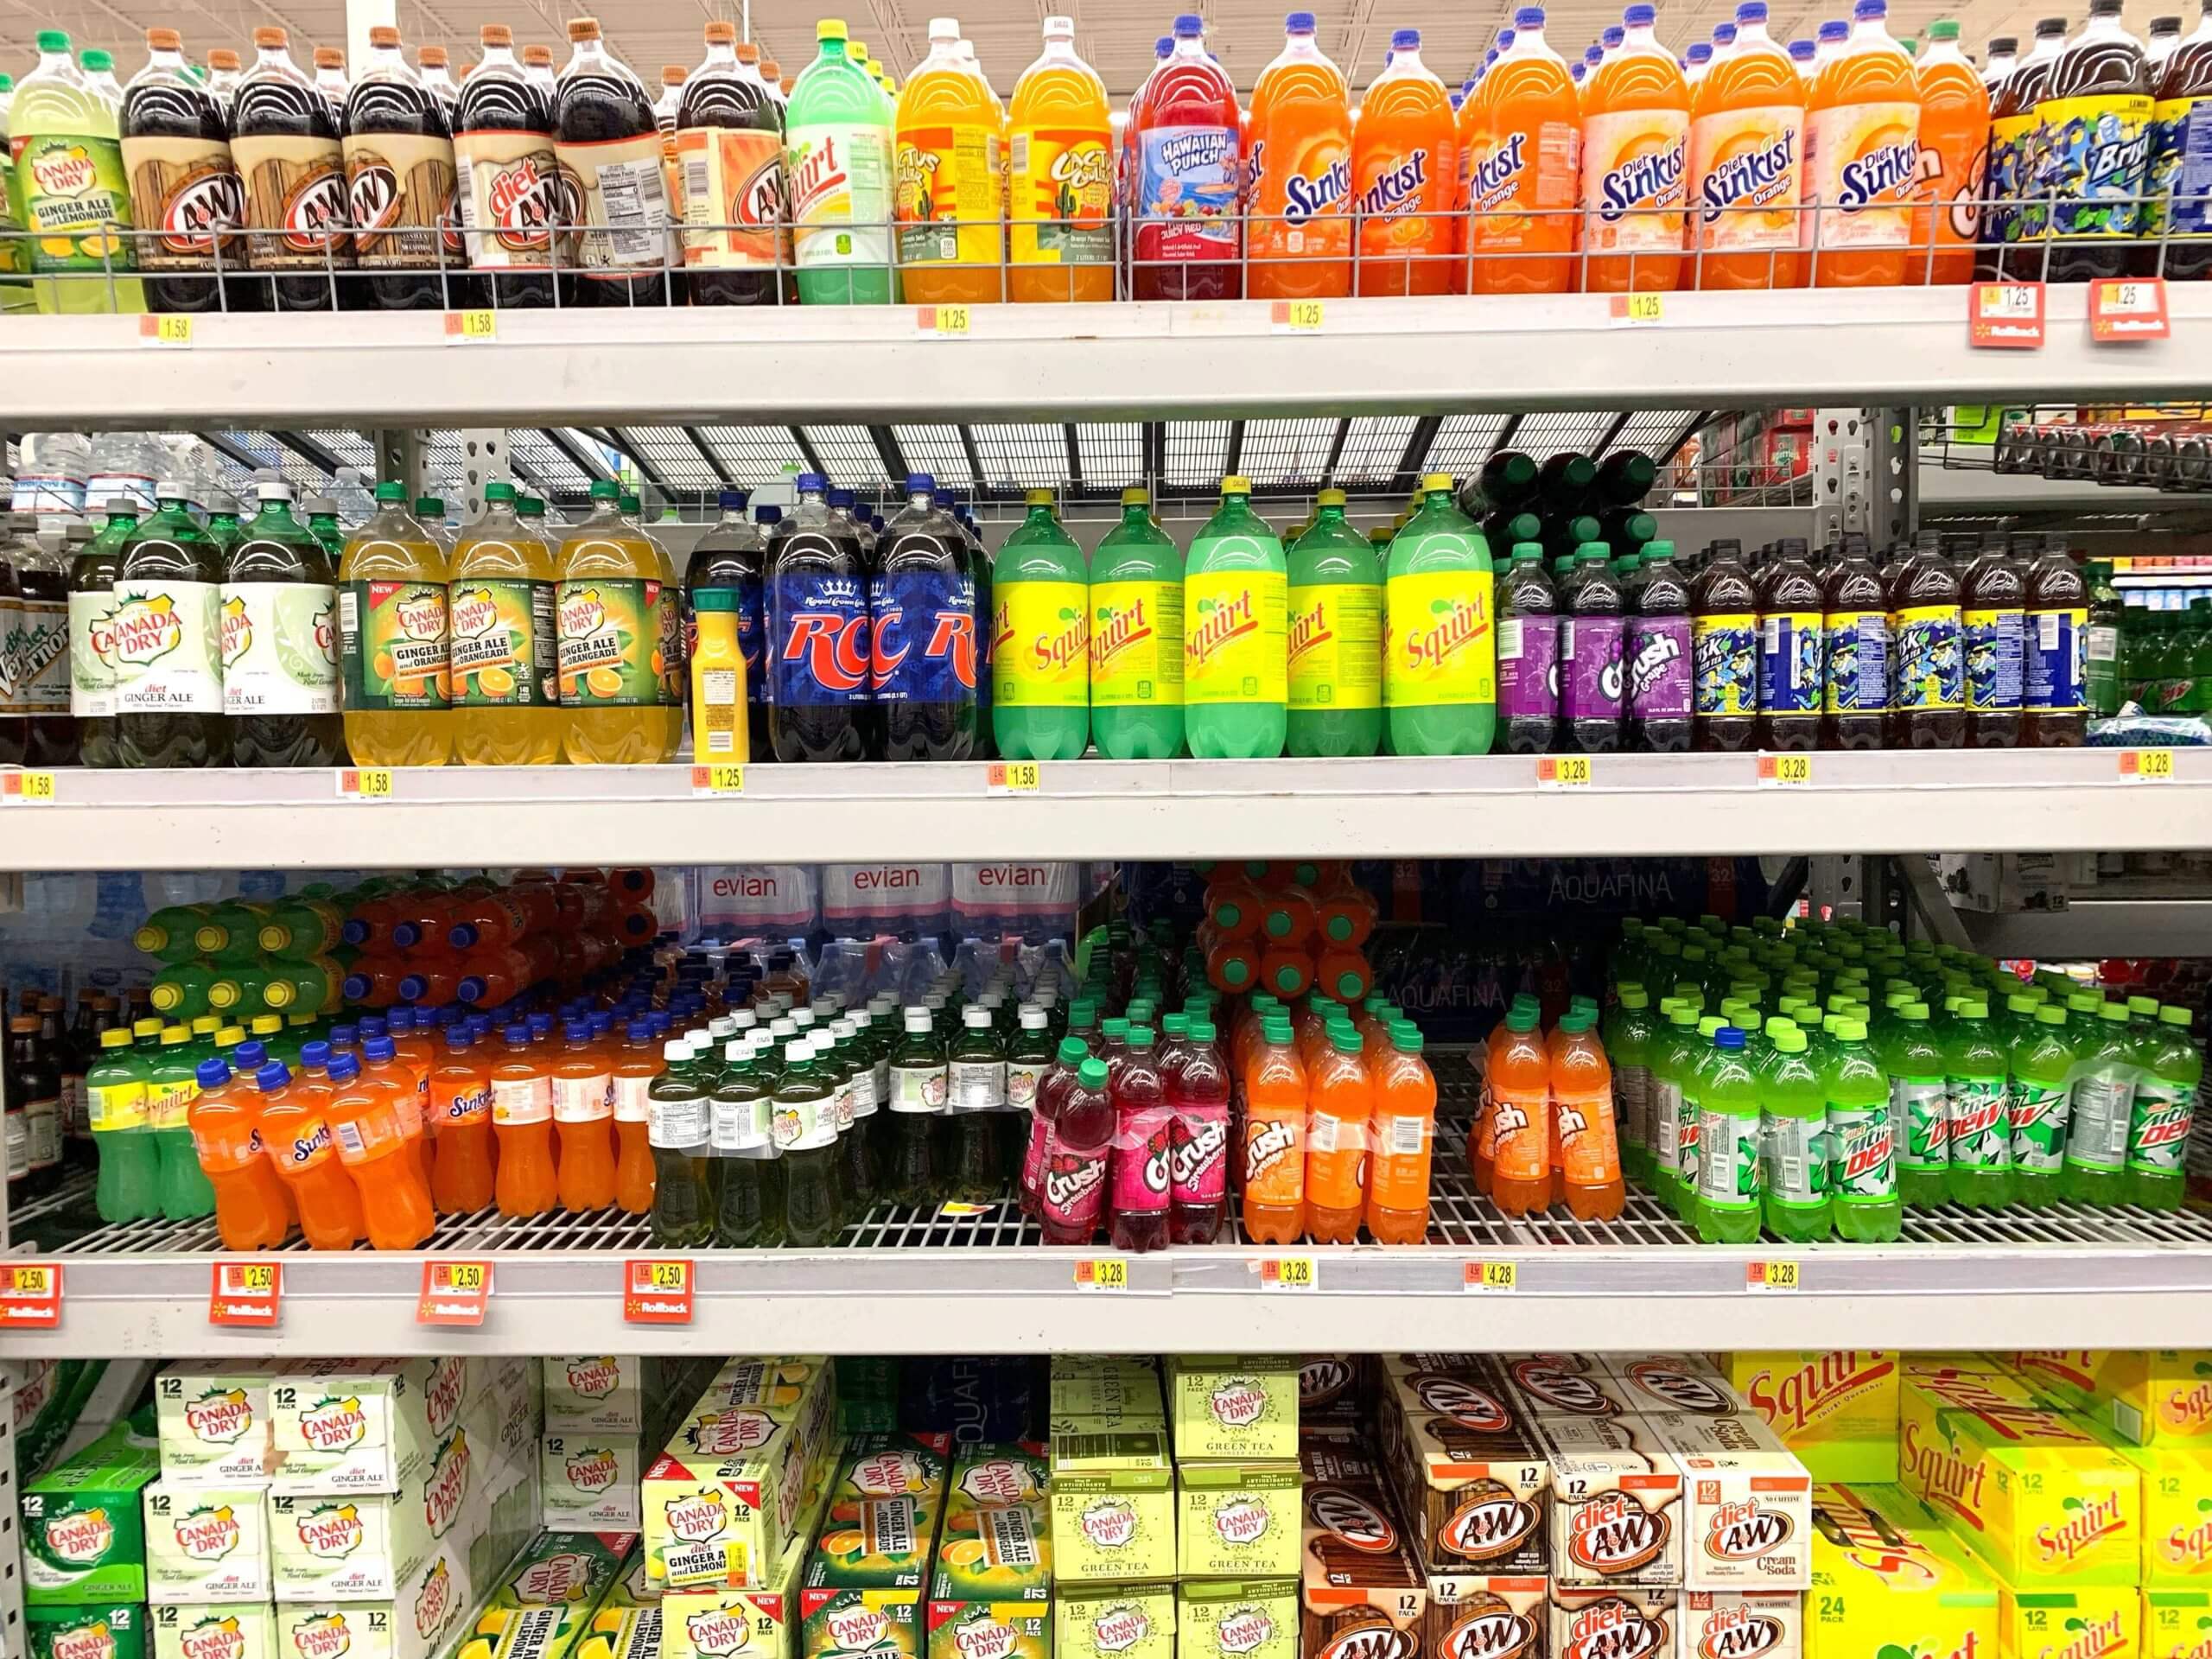 Shelves with soda drinks in a supermarket